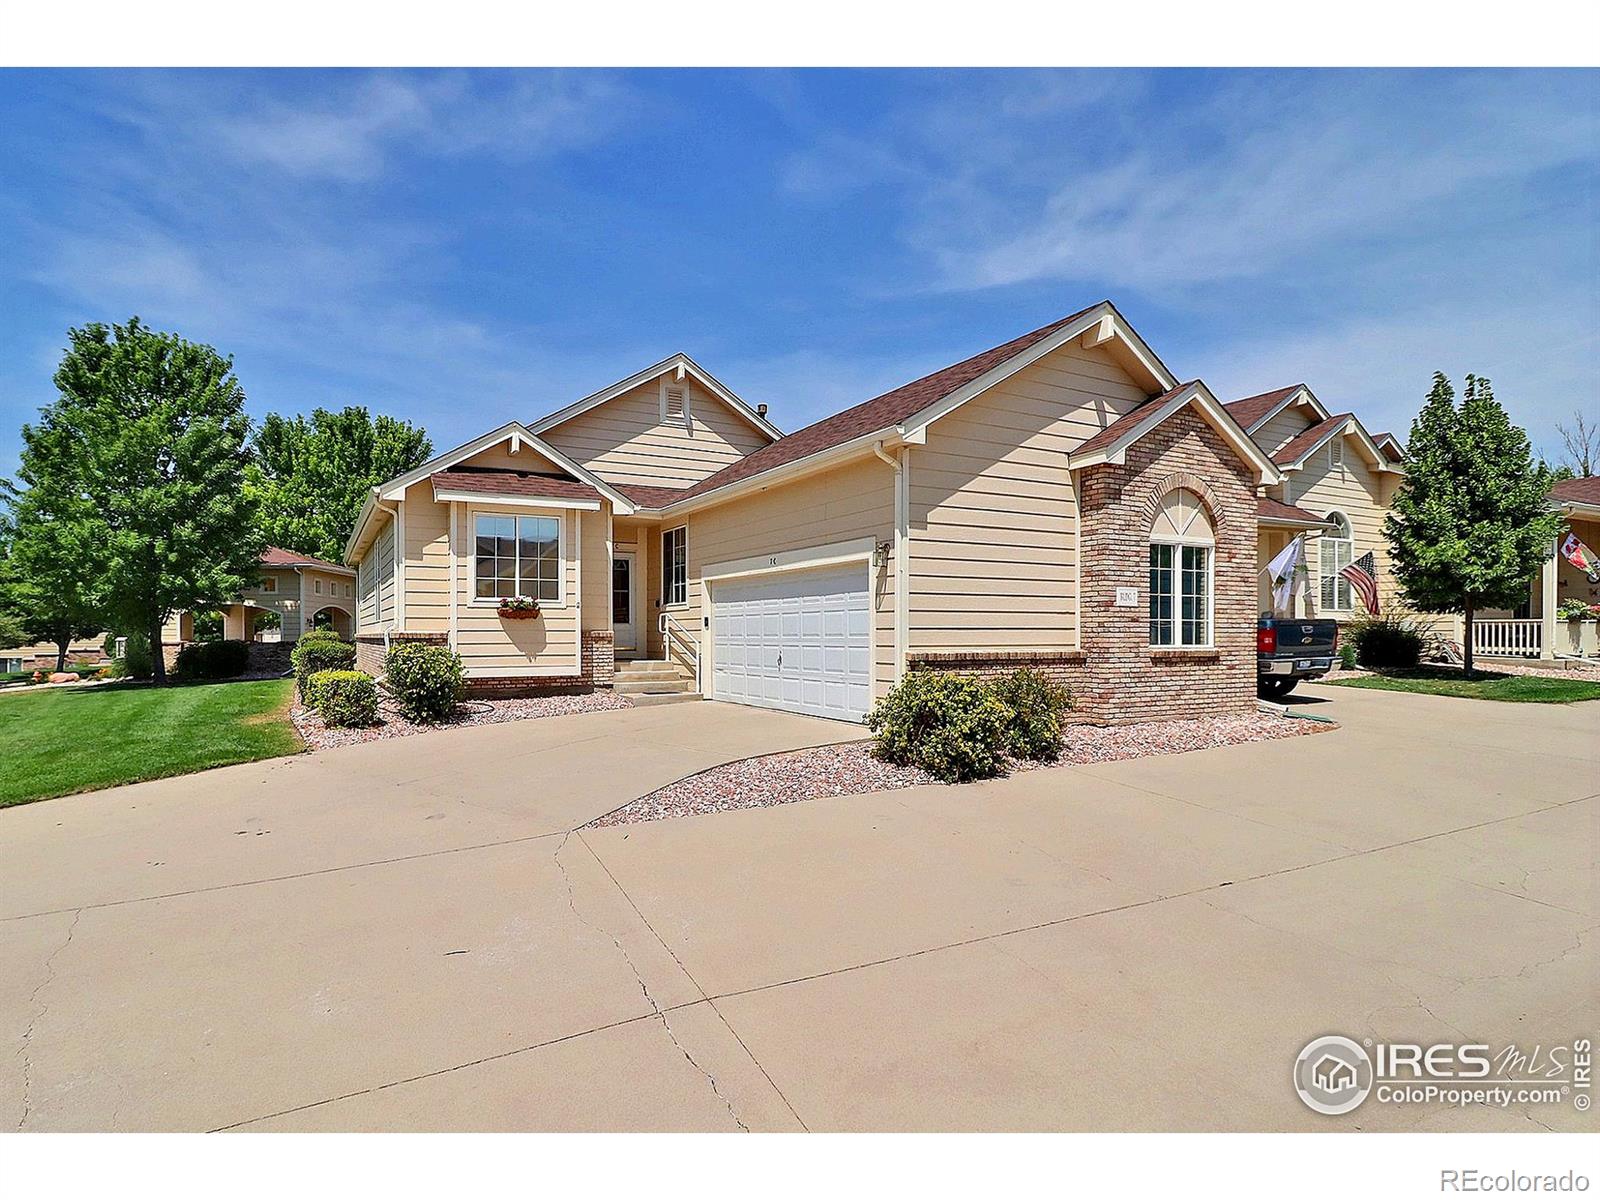 4902 29th, Greeley, CO